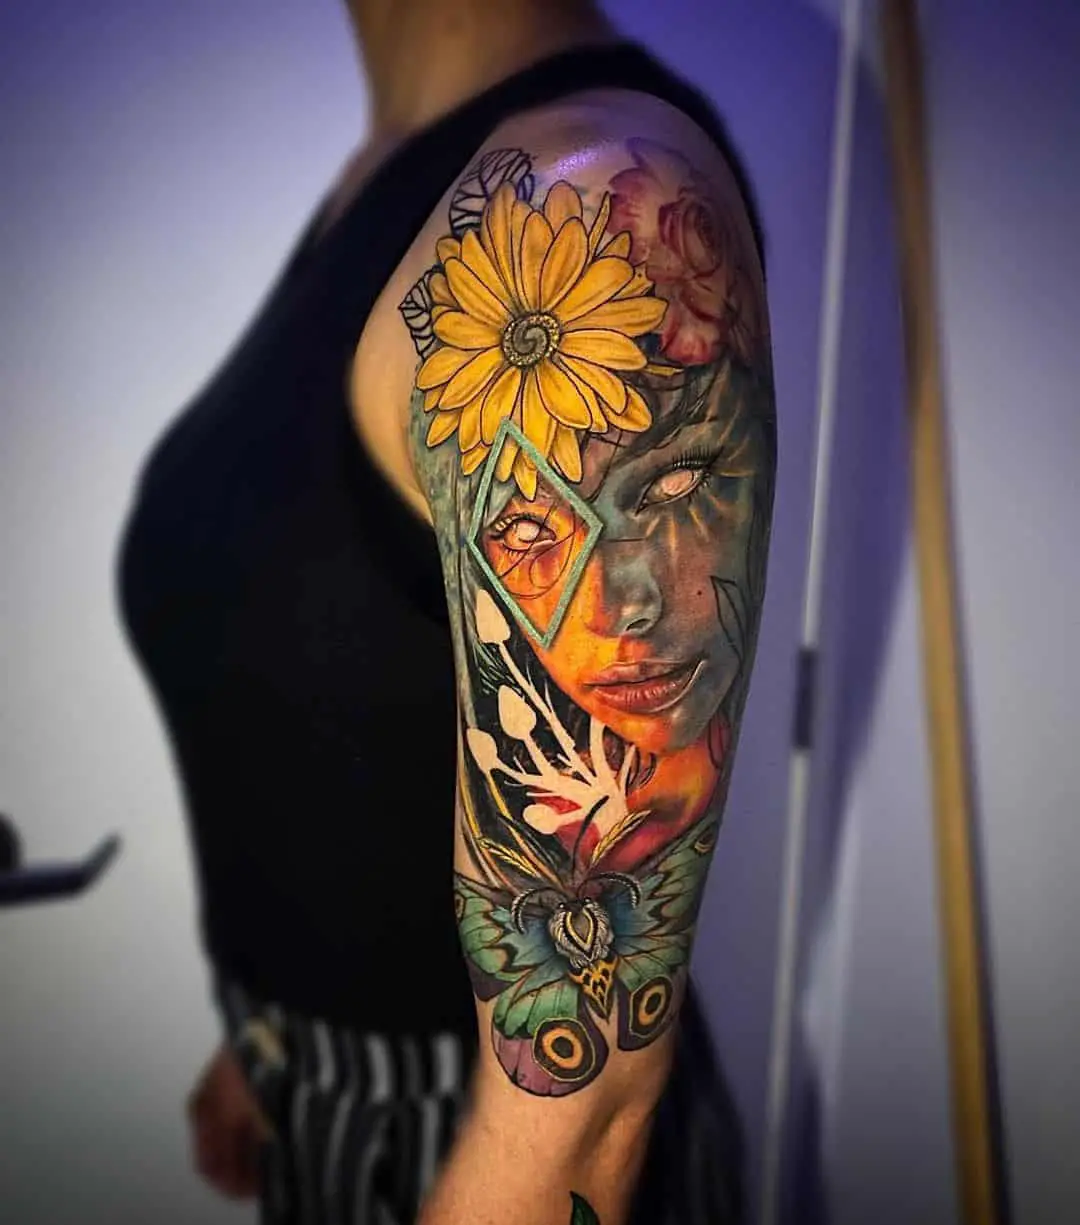 Blooming sunflower tattoo with girl portrait tattoo